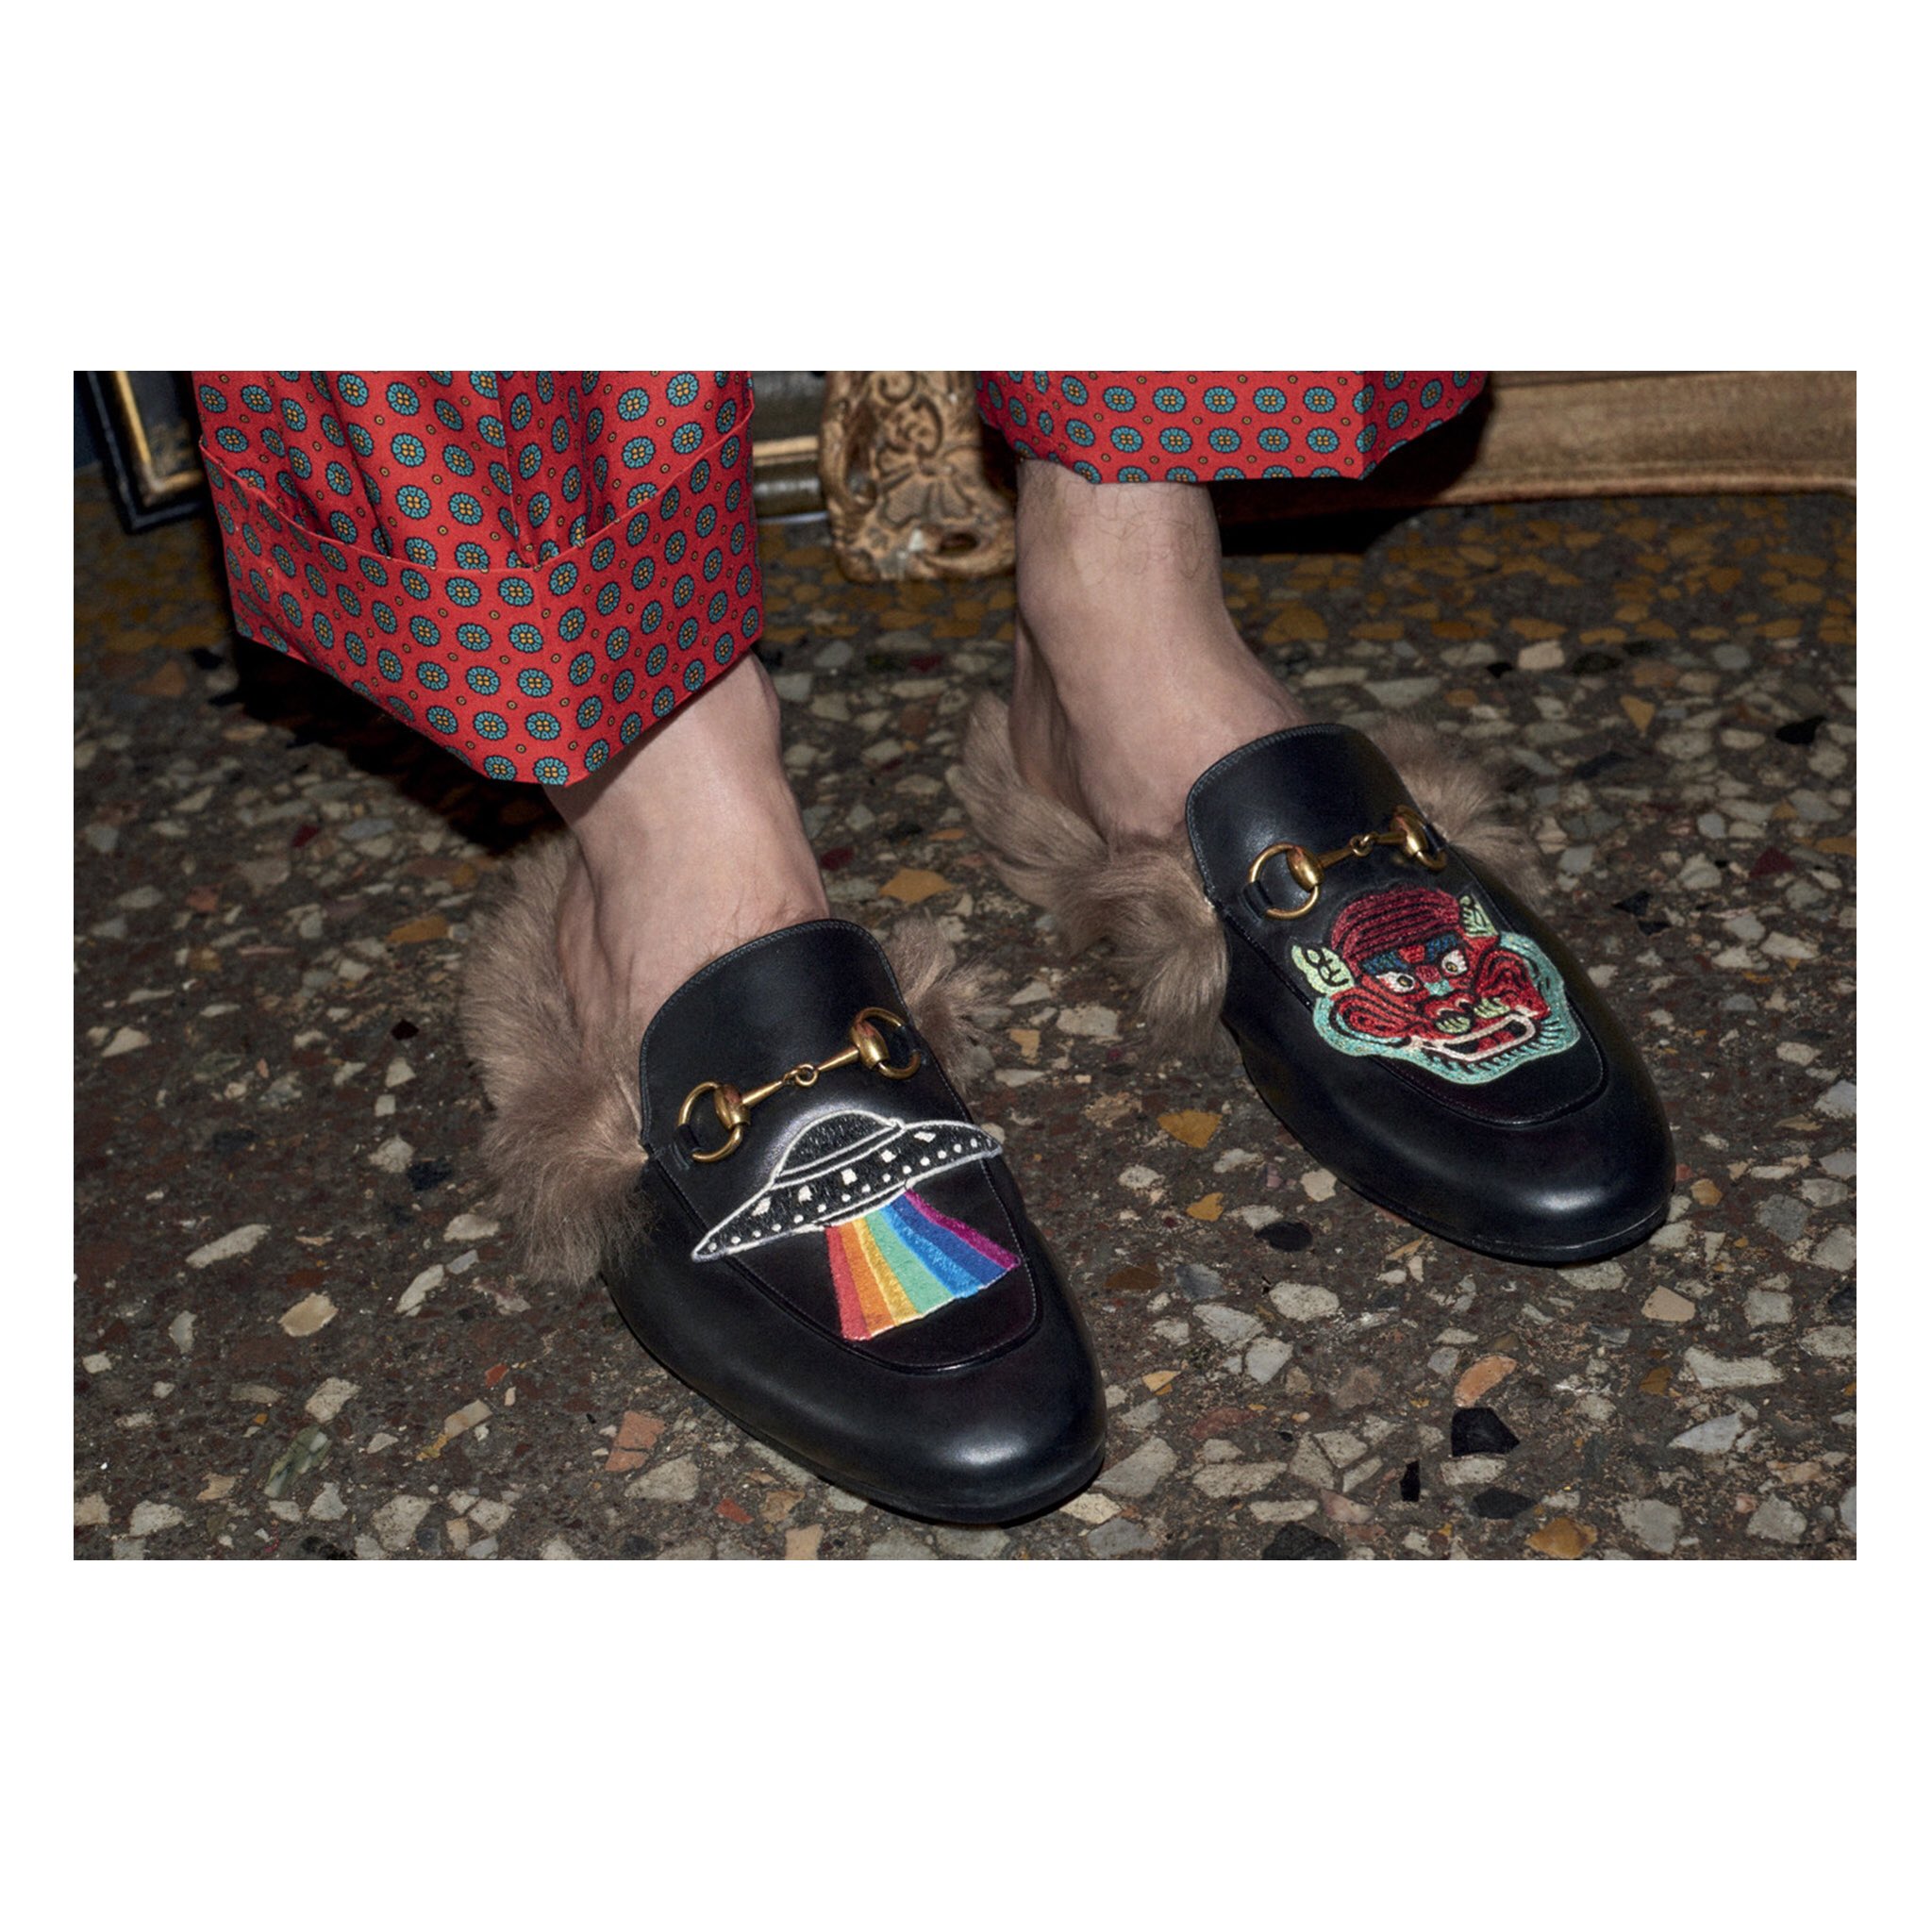 Vergelden West naald gucci on Twitter: "Rainbow UFO embroideries appear on the iconic  #GucciPrincetown slipper. #GucciPreFall17 https://t.co/PlGo3IvI1b  https://t.co/Q1y1RjtKlF" / Twitter